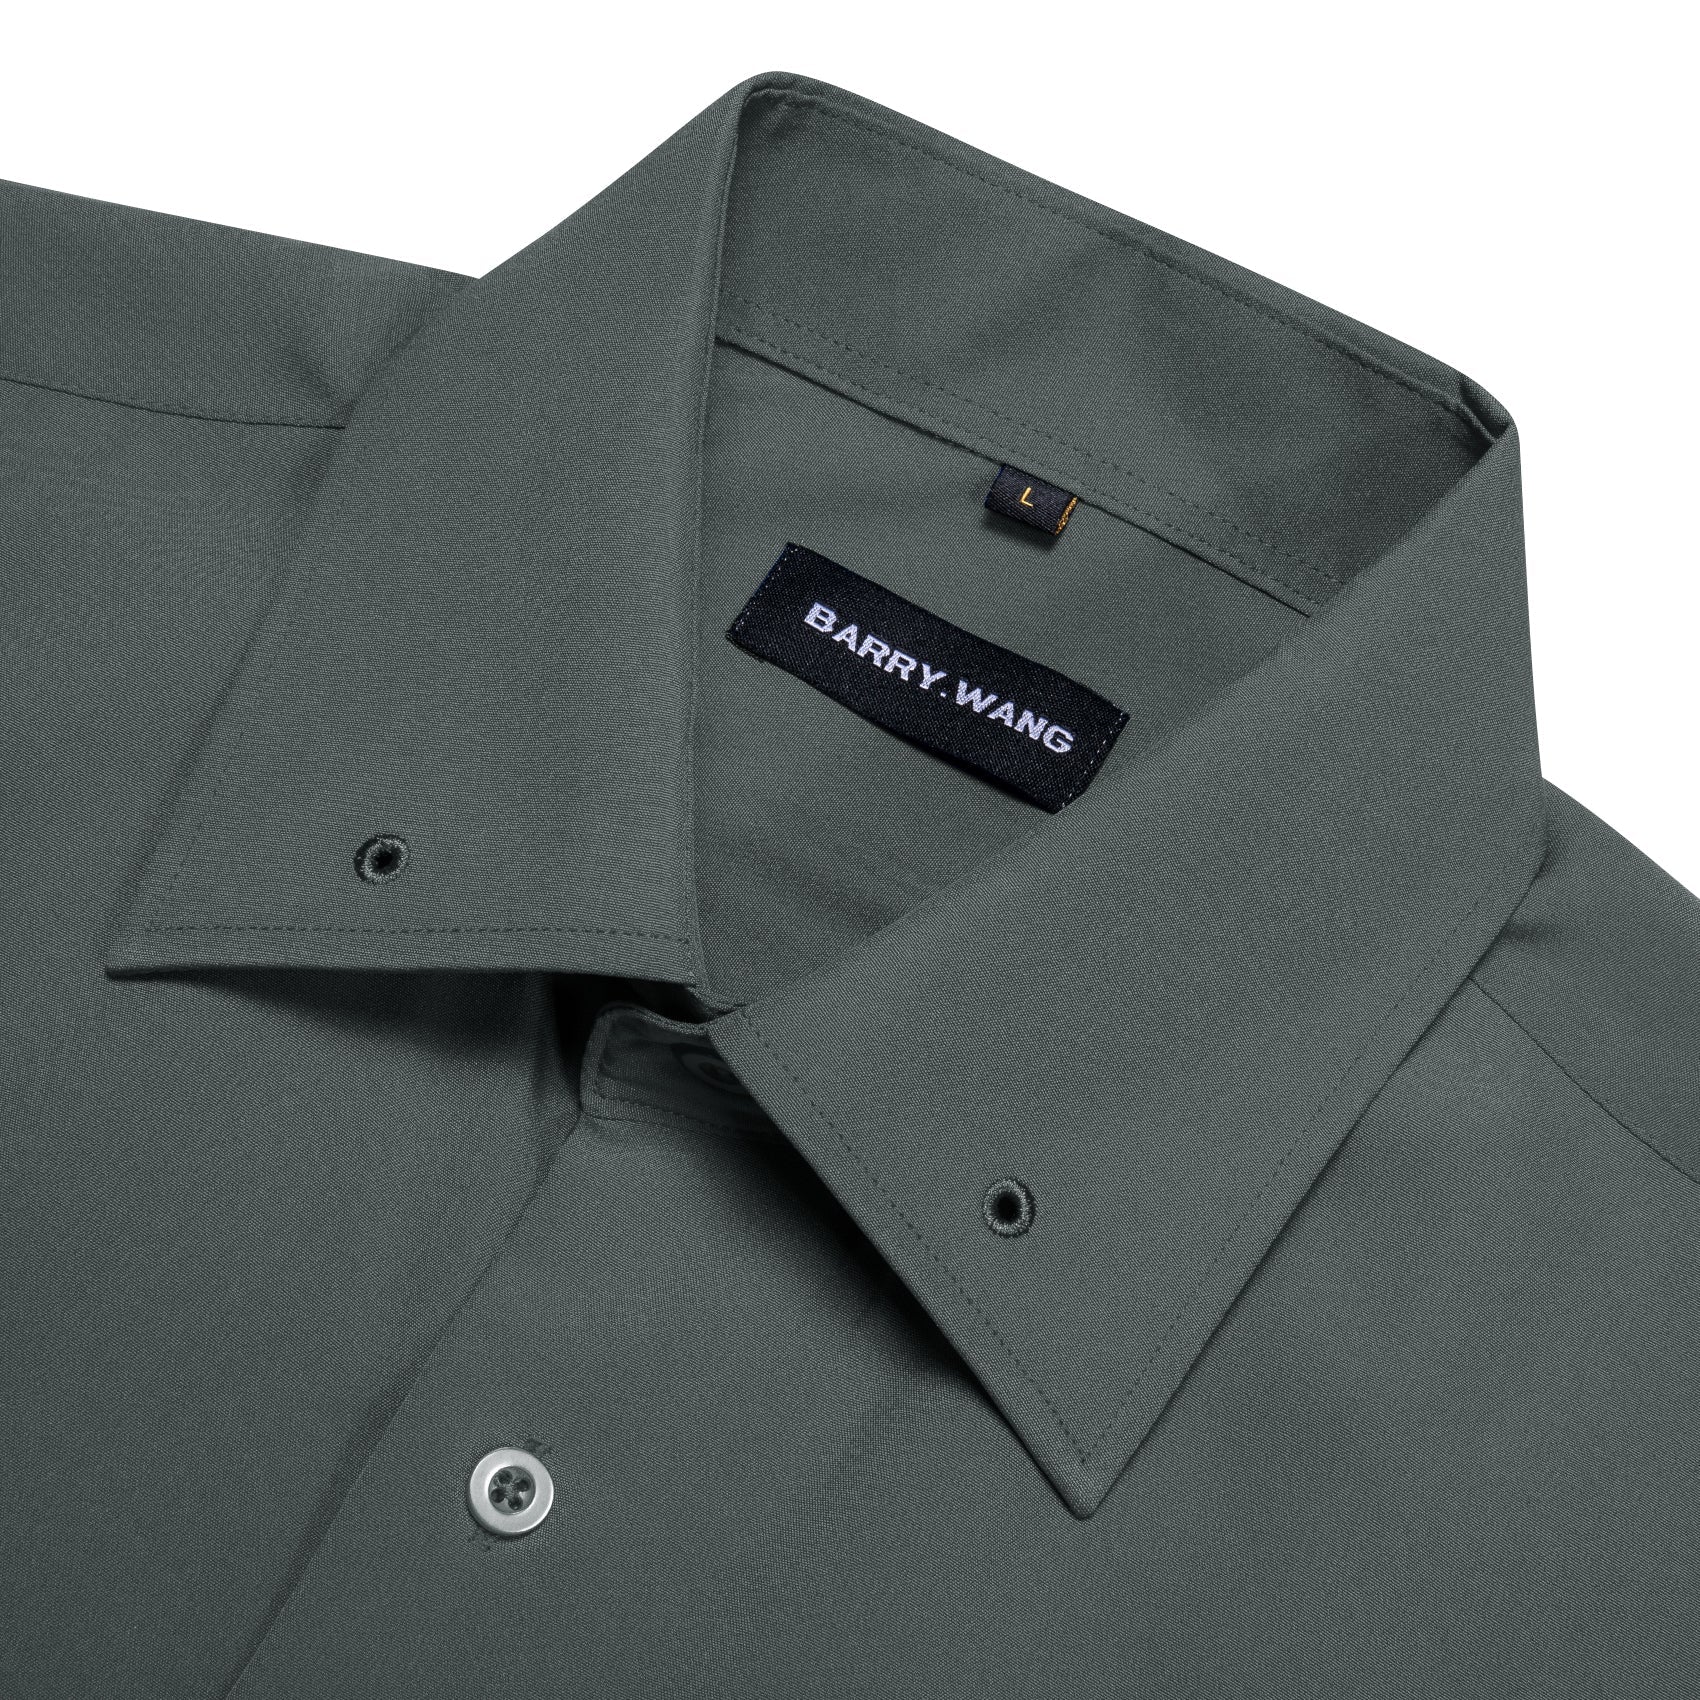 Barry.wang Olive Green Solid Silk Shirt with Collar Pin